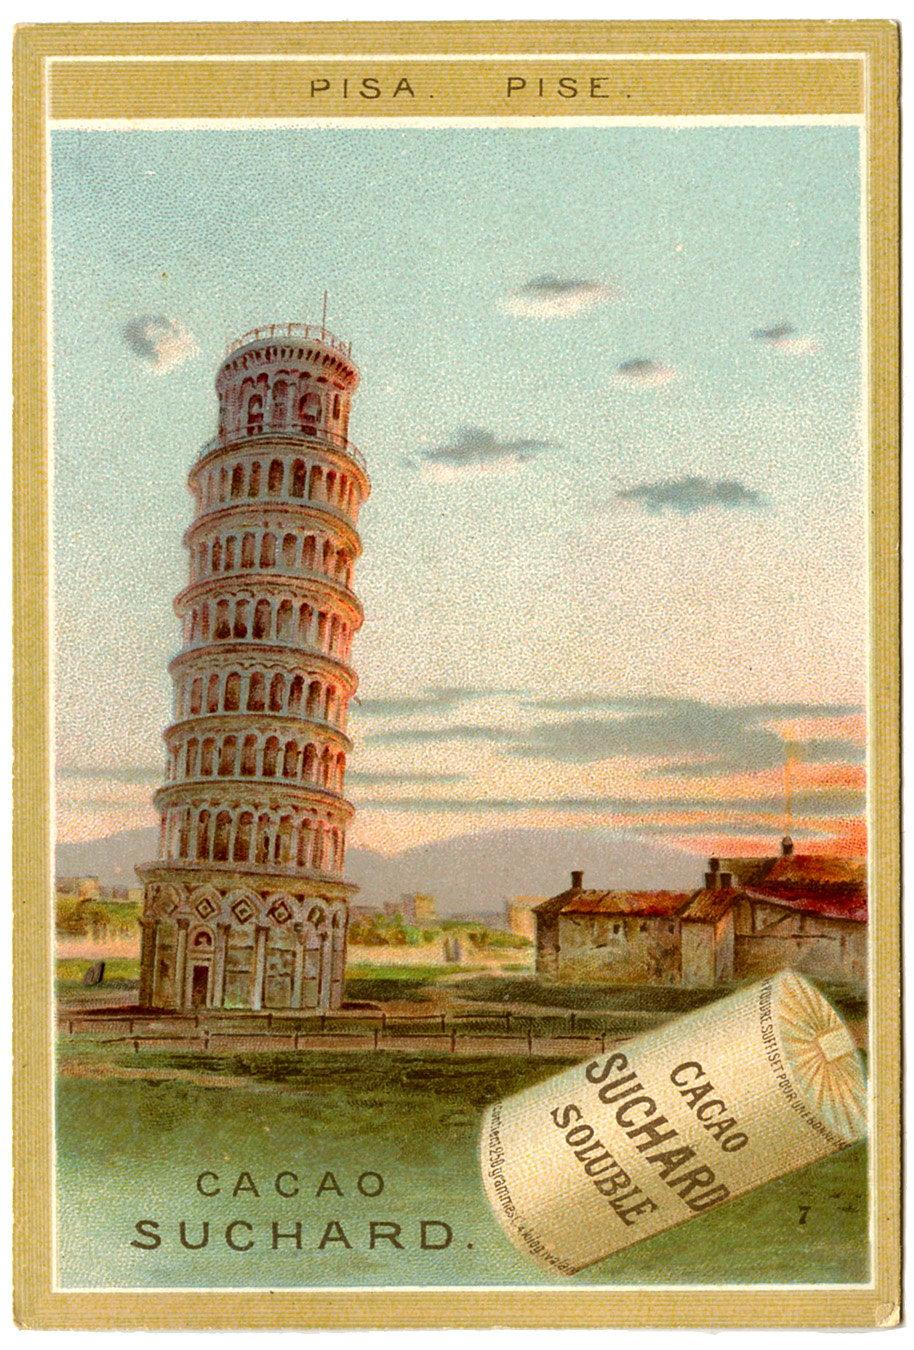 Old Image - Tower of Pisa - The Graphics Fairy